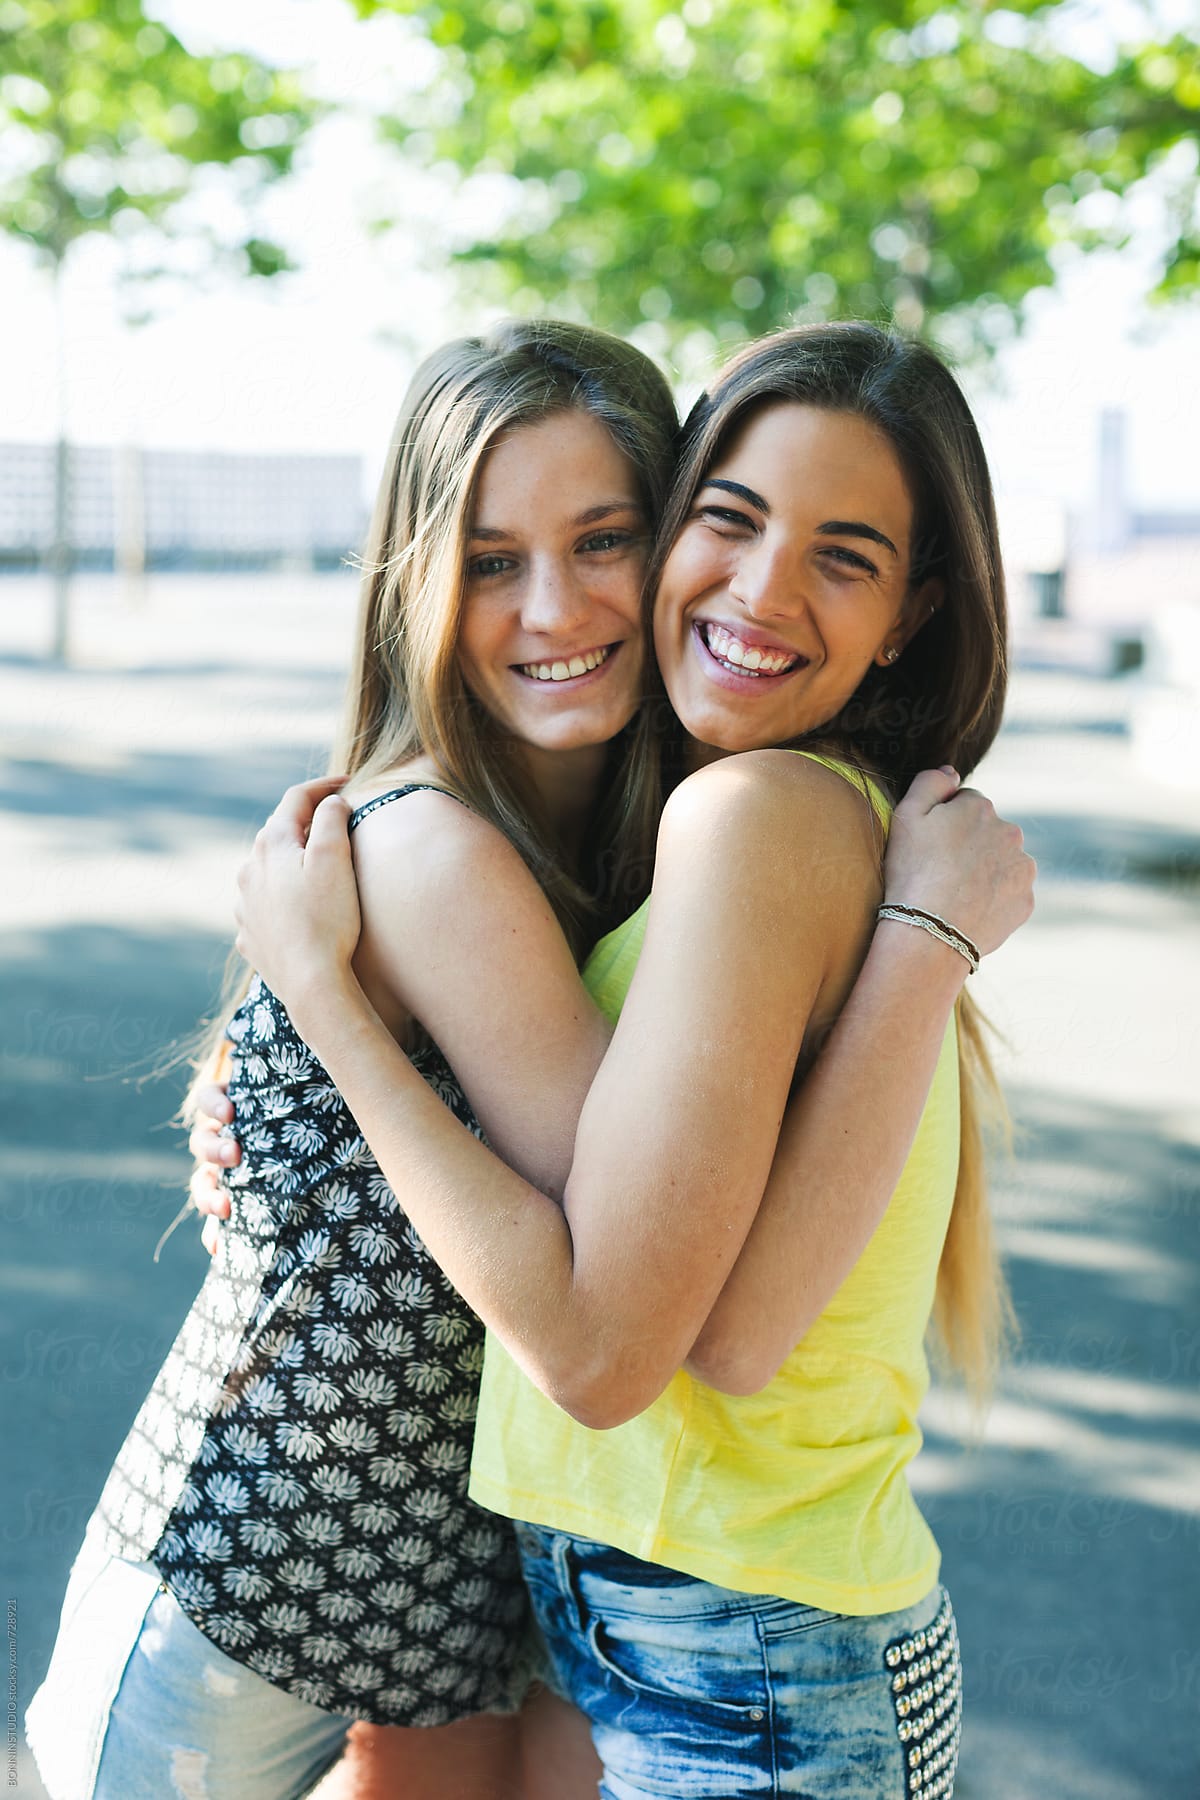 "Young Female Friends Embracing Together Standing In A Park." by